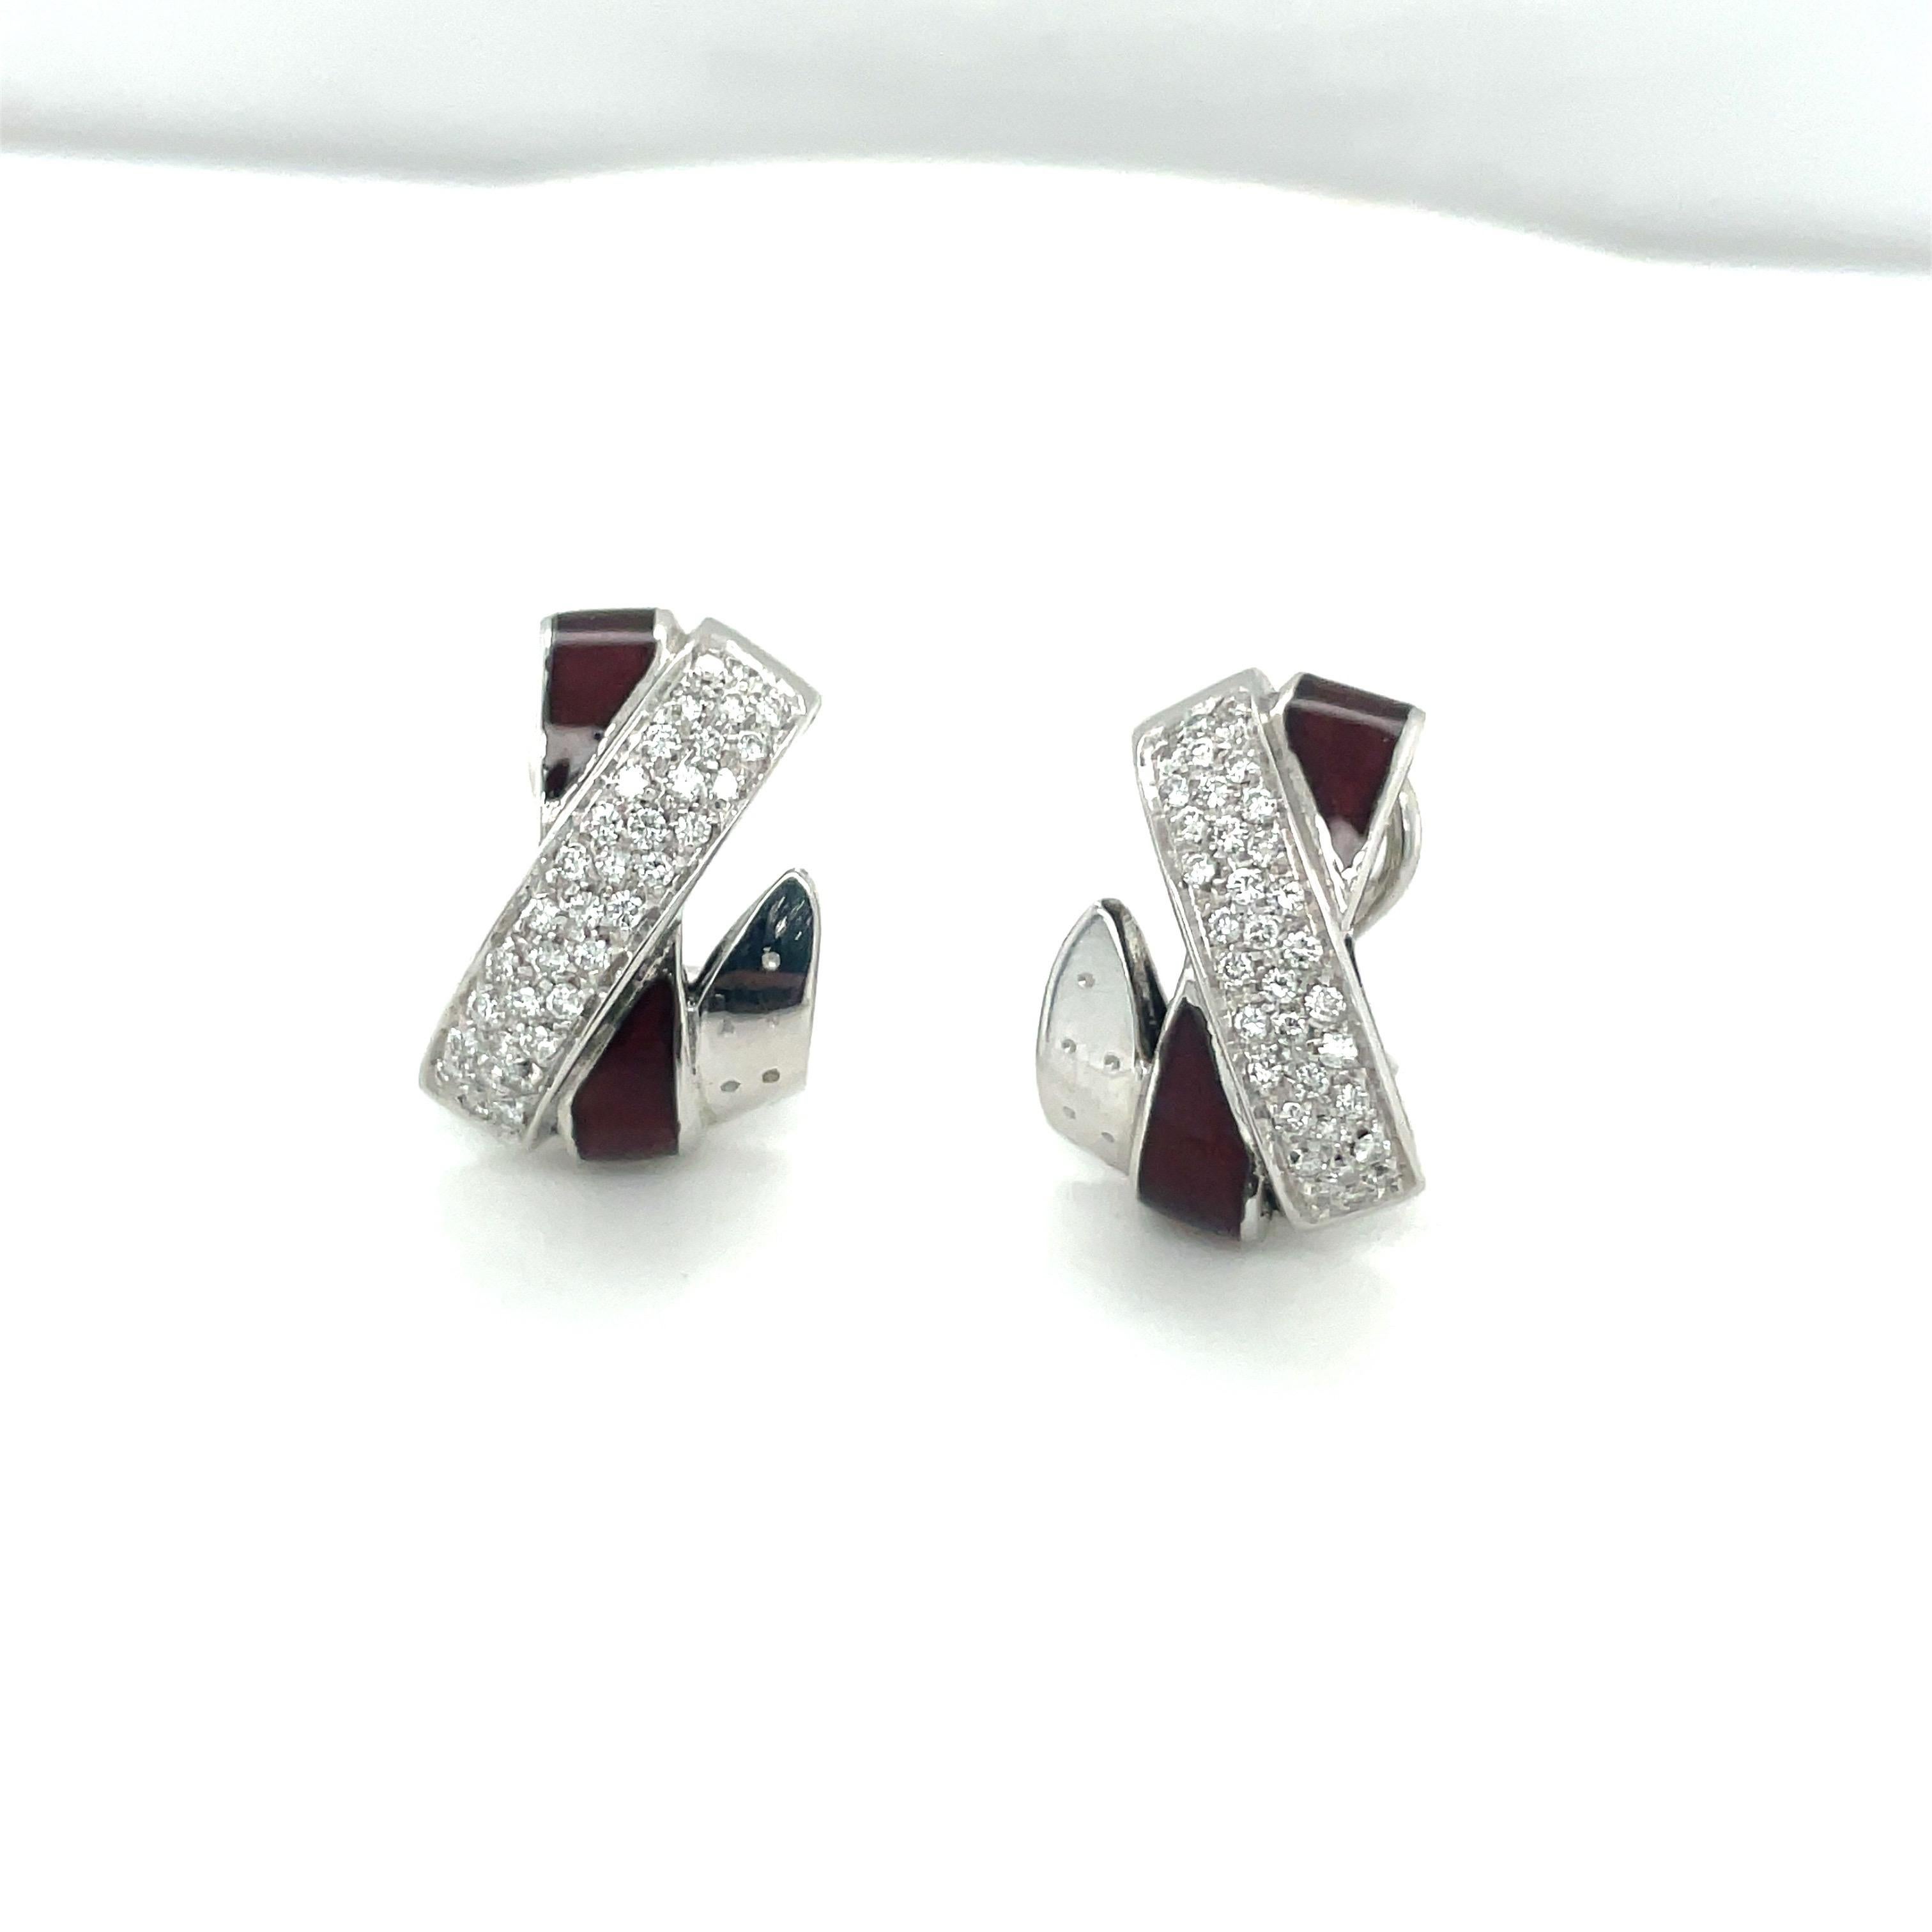 These beautiful 18kt white gold La Nouvelle Bagues  earrings ,done in their signature criss-cross motif are accentuated by pave diamonds and burgundy enamel. They measure 21 mm in length. They have post /omega  backs. They can be adjusted for non